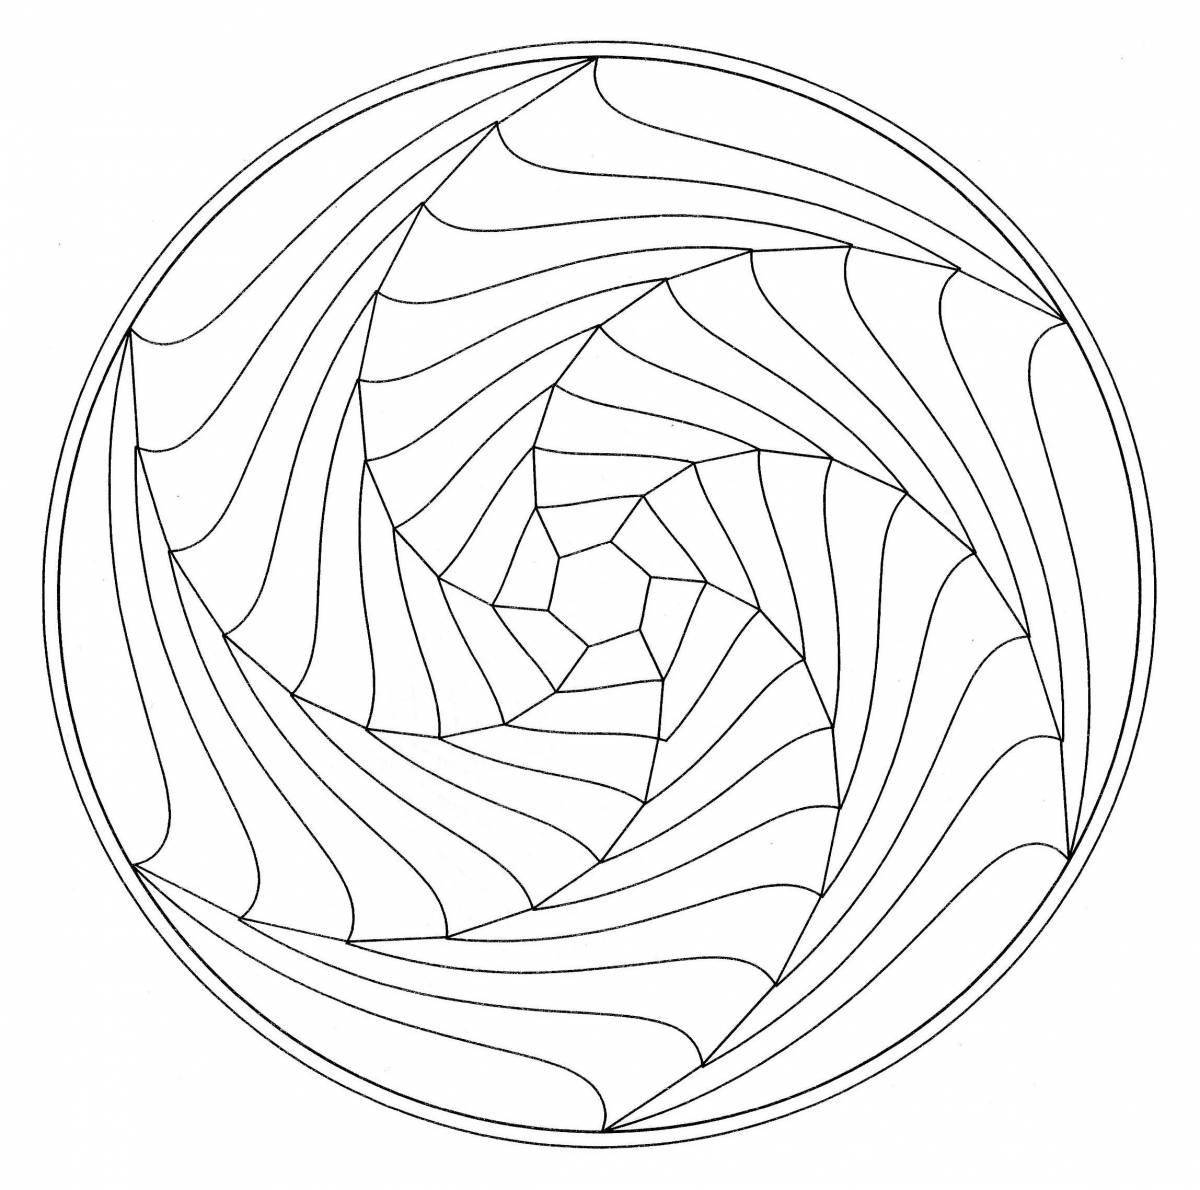 Detailed coloring page of a spiral with a circular pattern